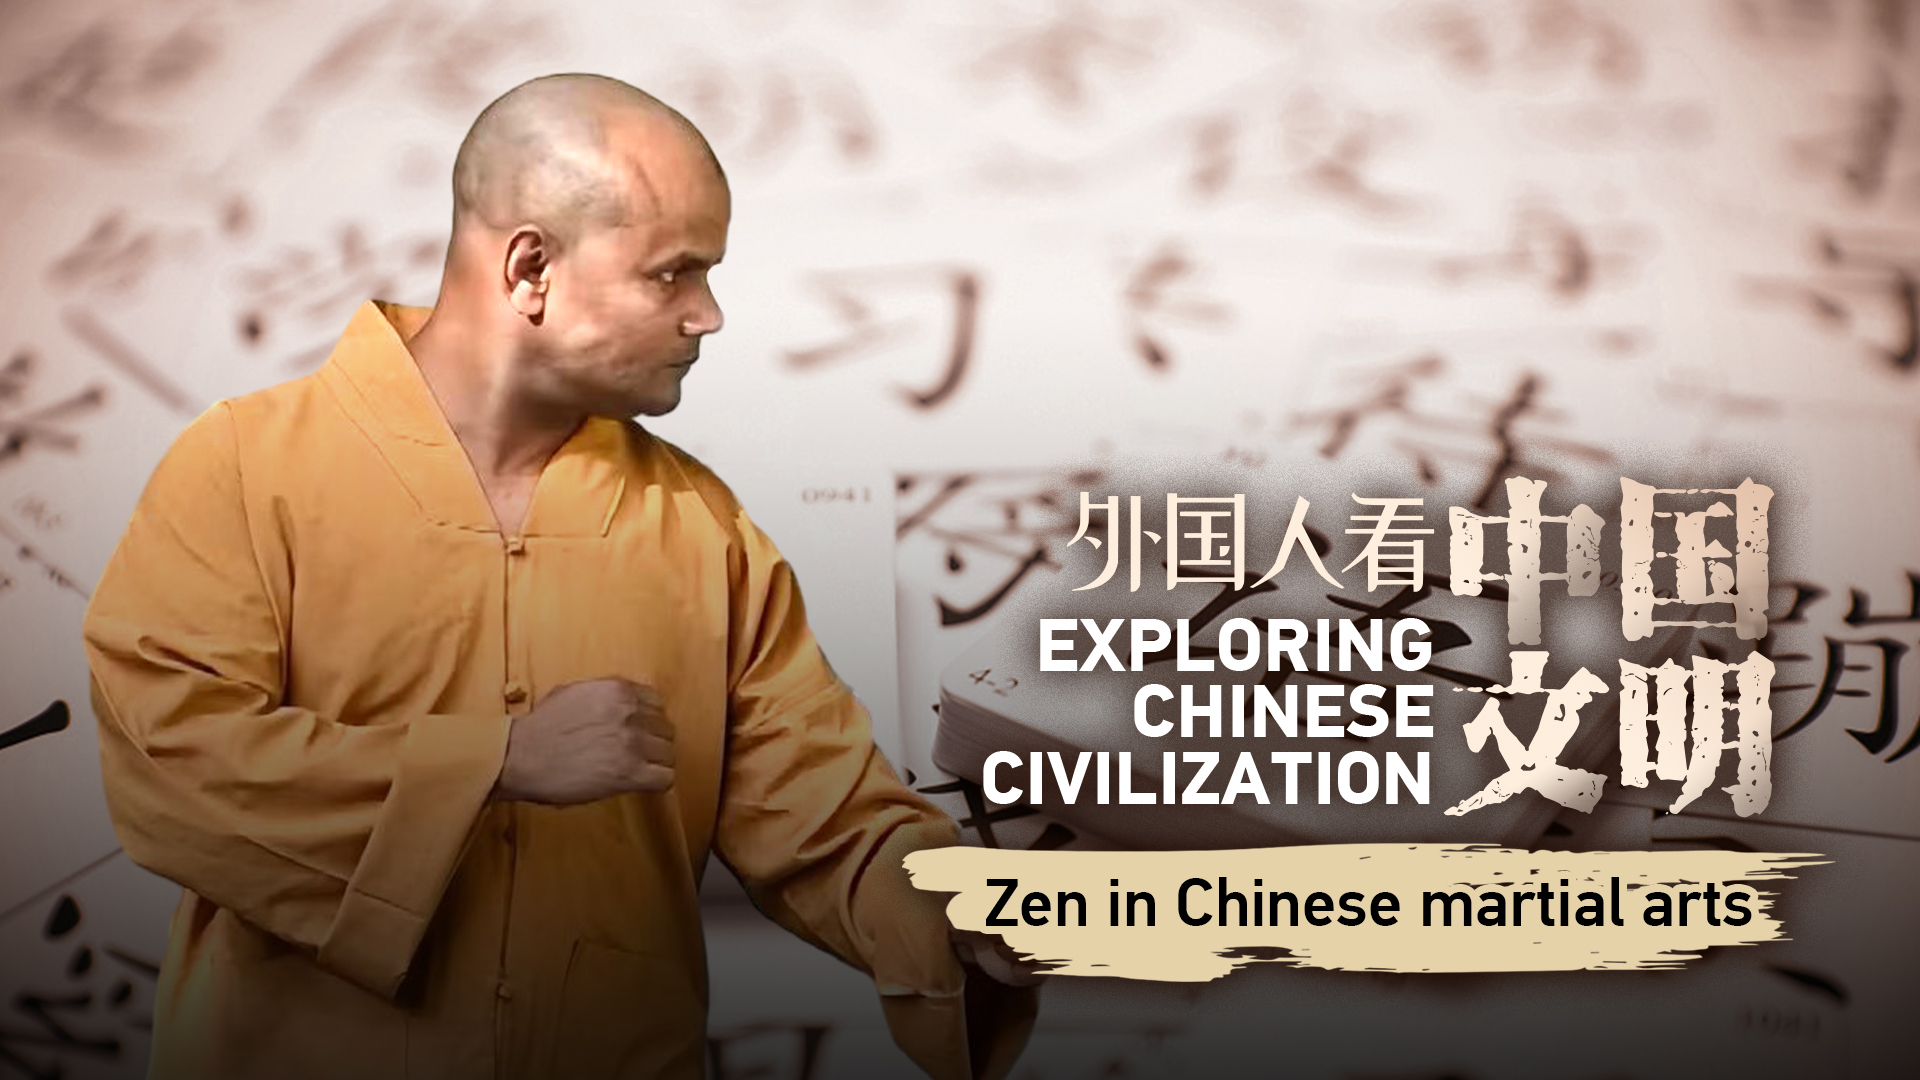 Exploring Chinese Civilization: more than just martial arts in kung fu